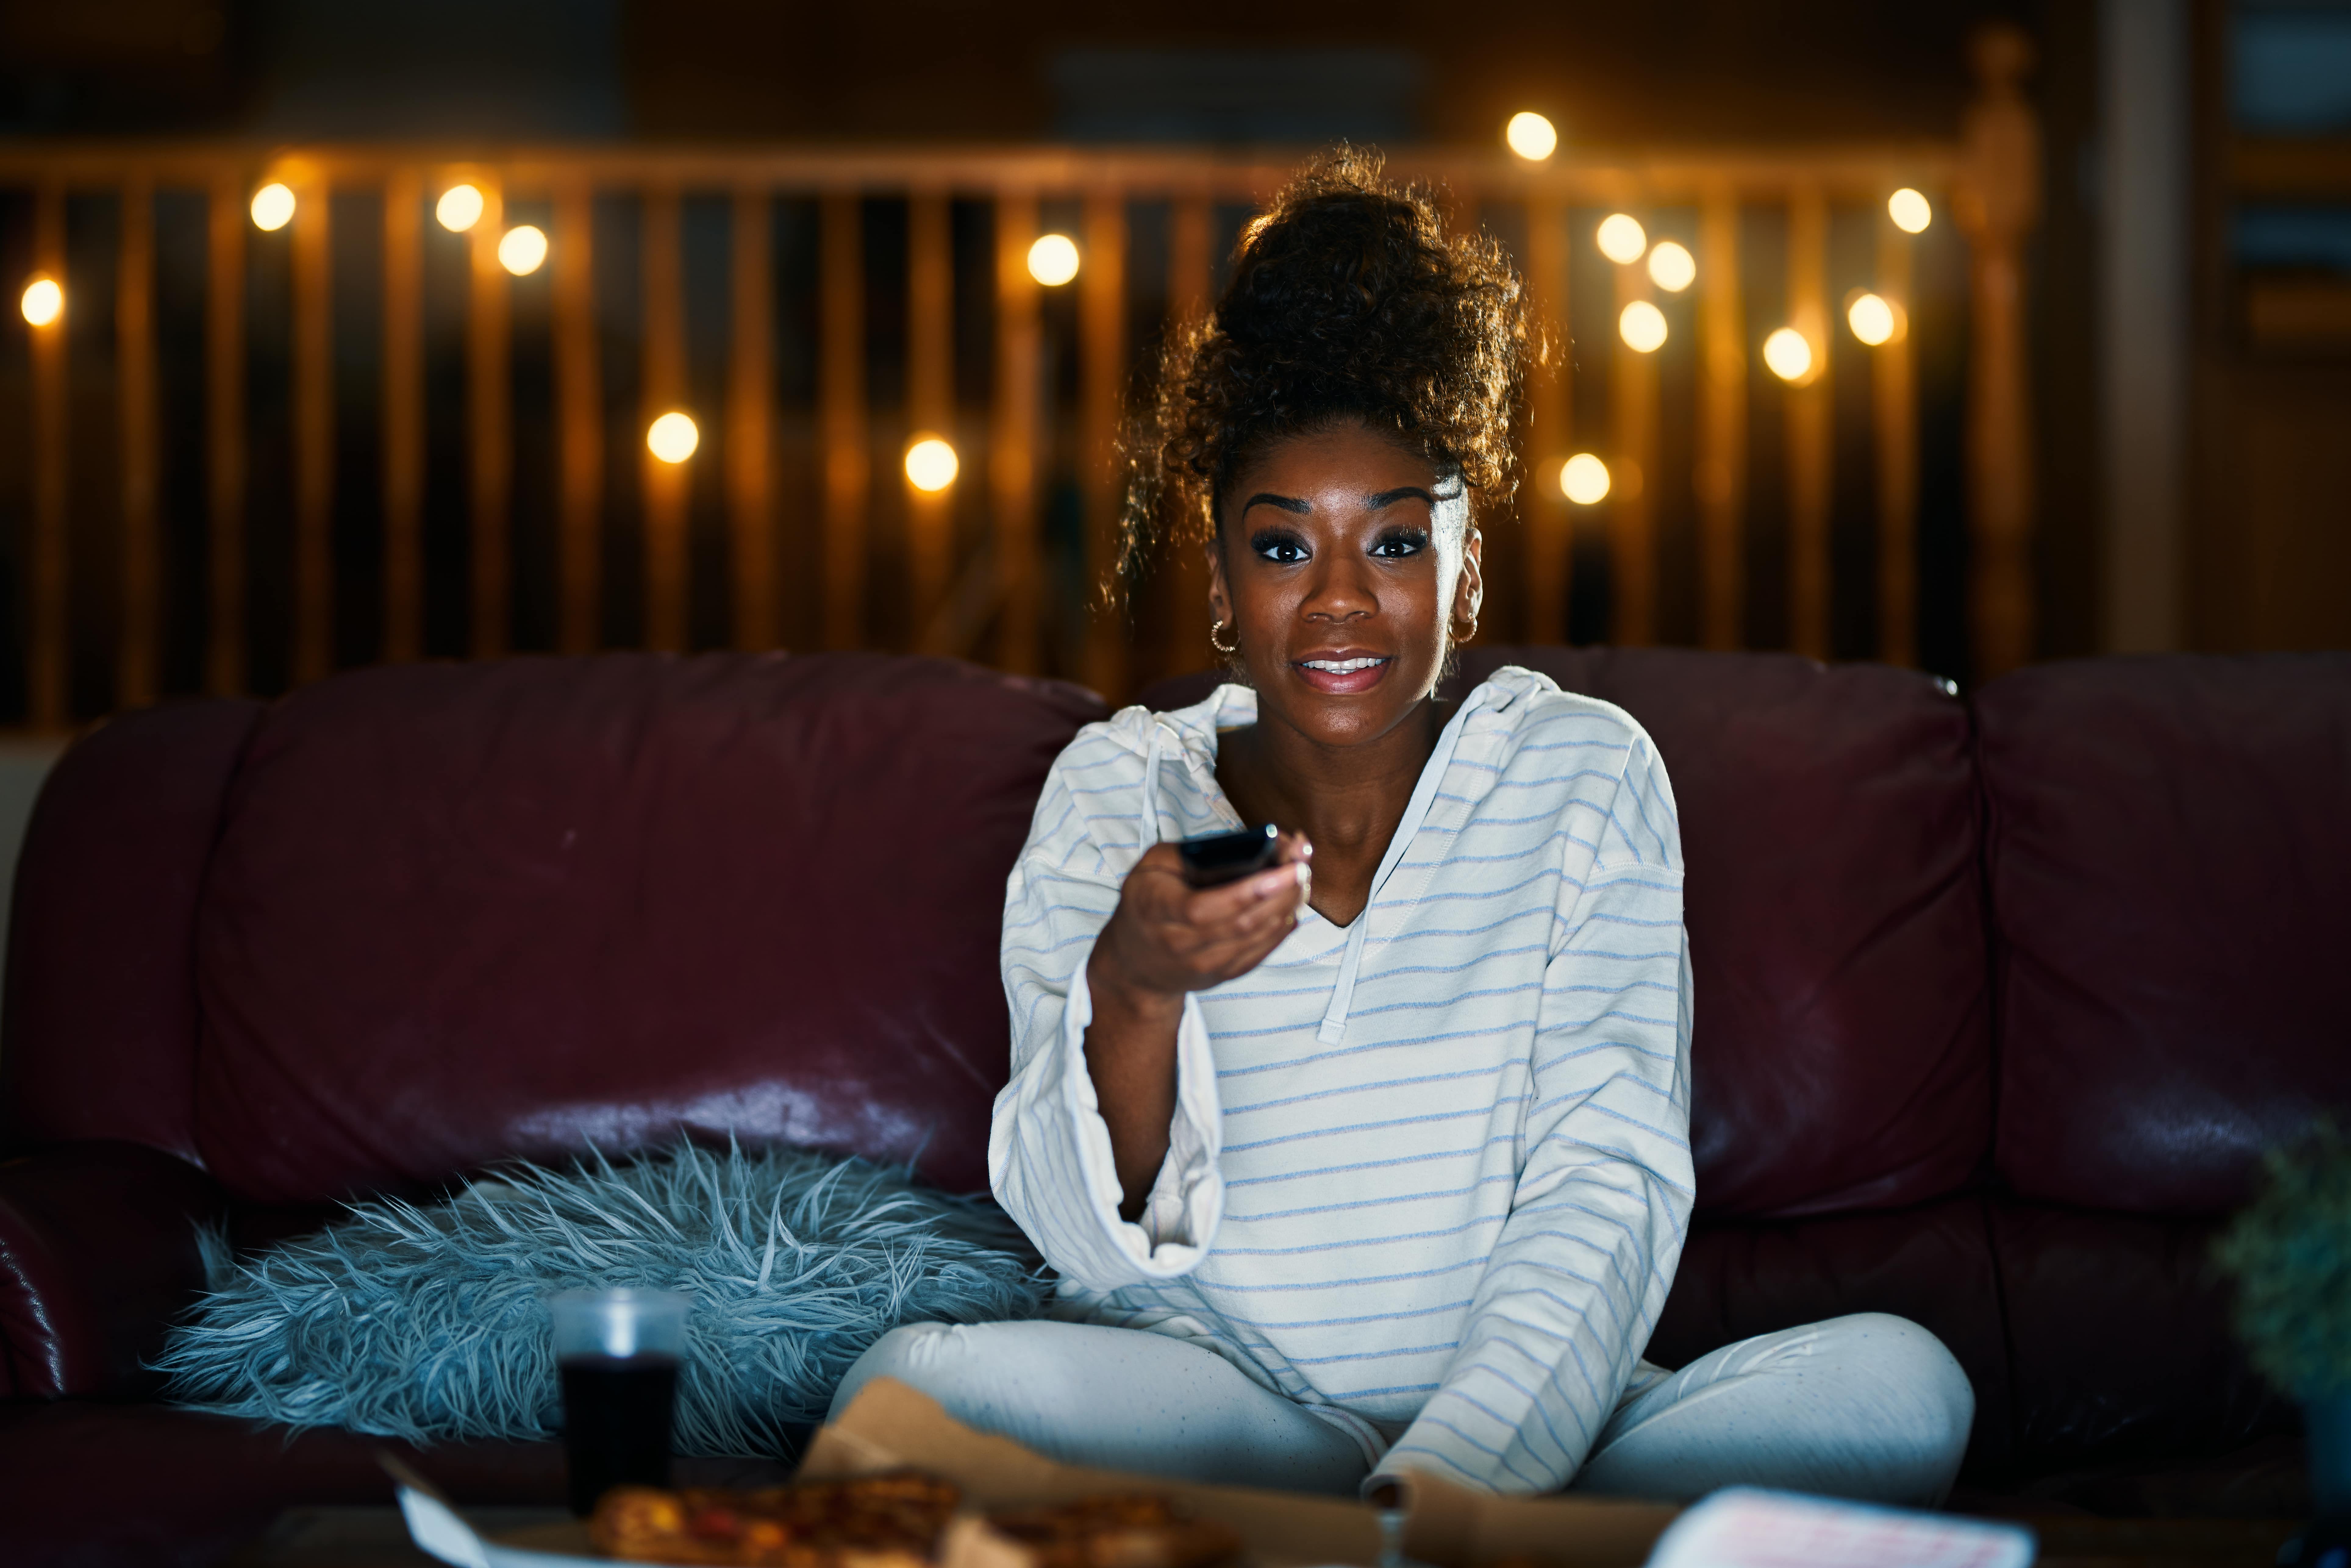 Smiling woman pointing a television remote towards the foreground and seems to be watching T.V. It is dark and there are fairy lights strung up in the background.